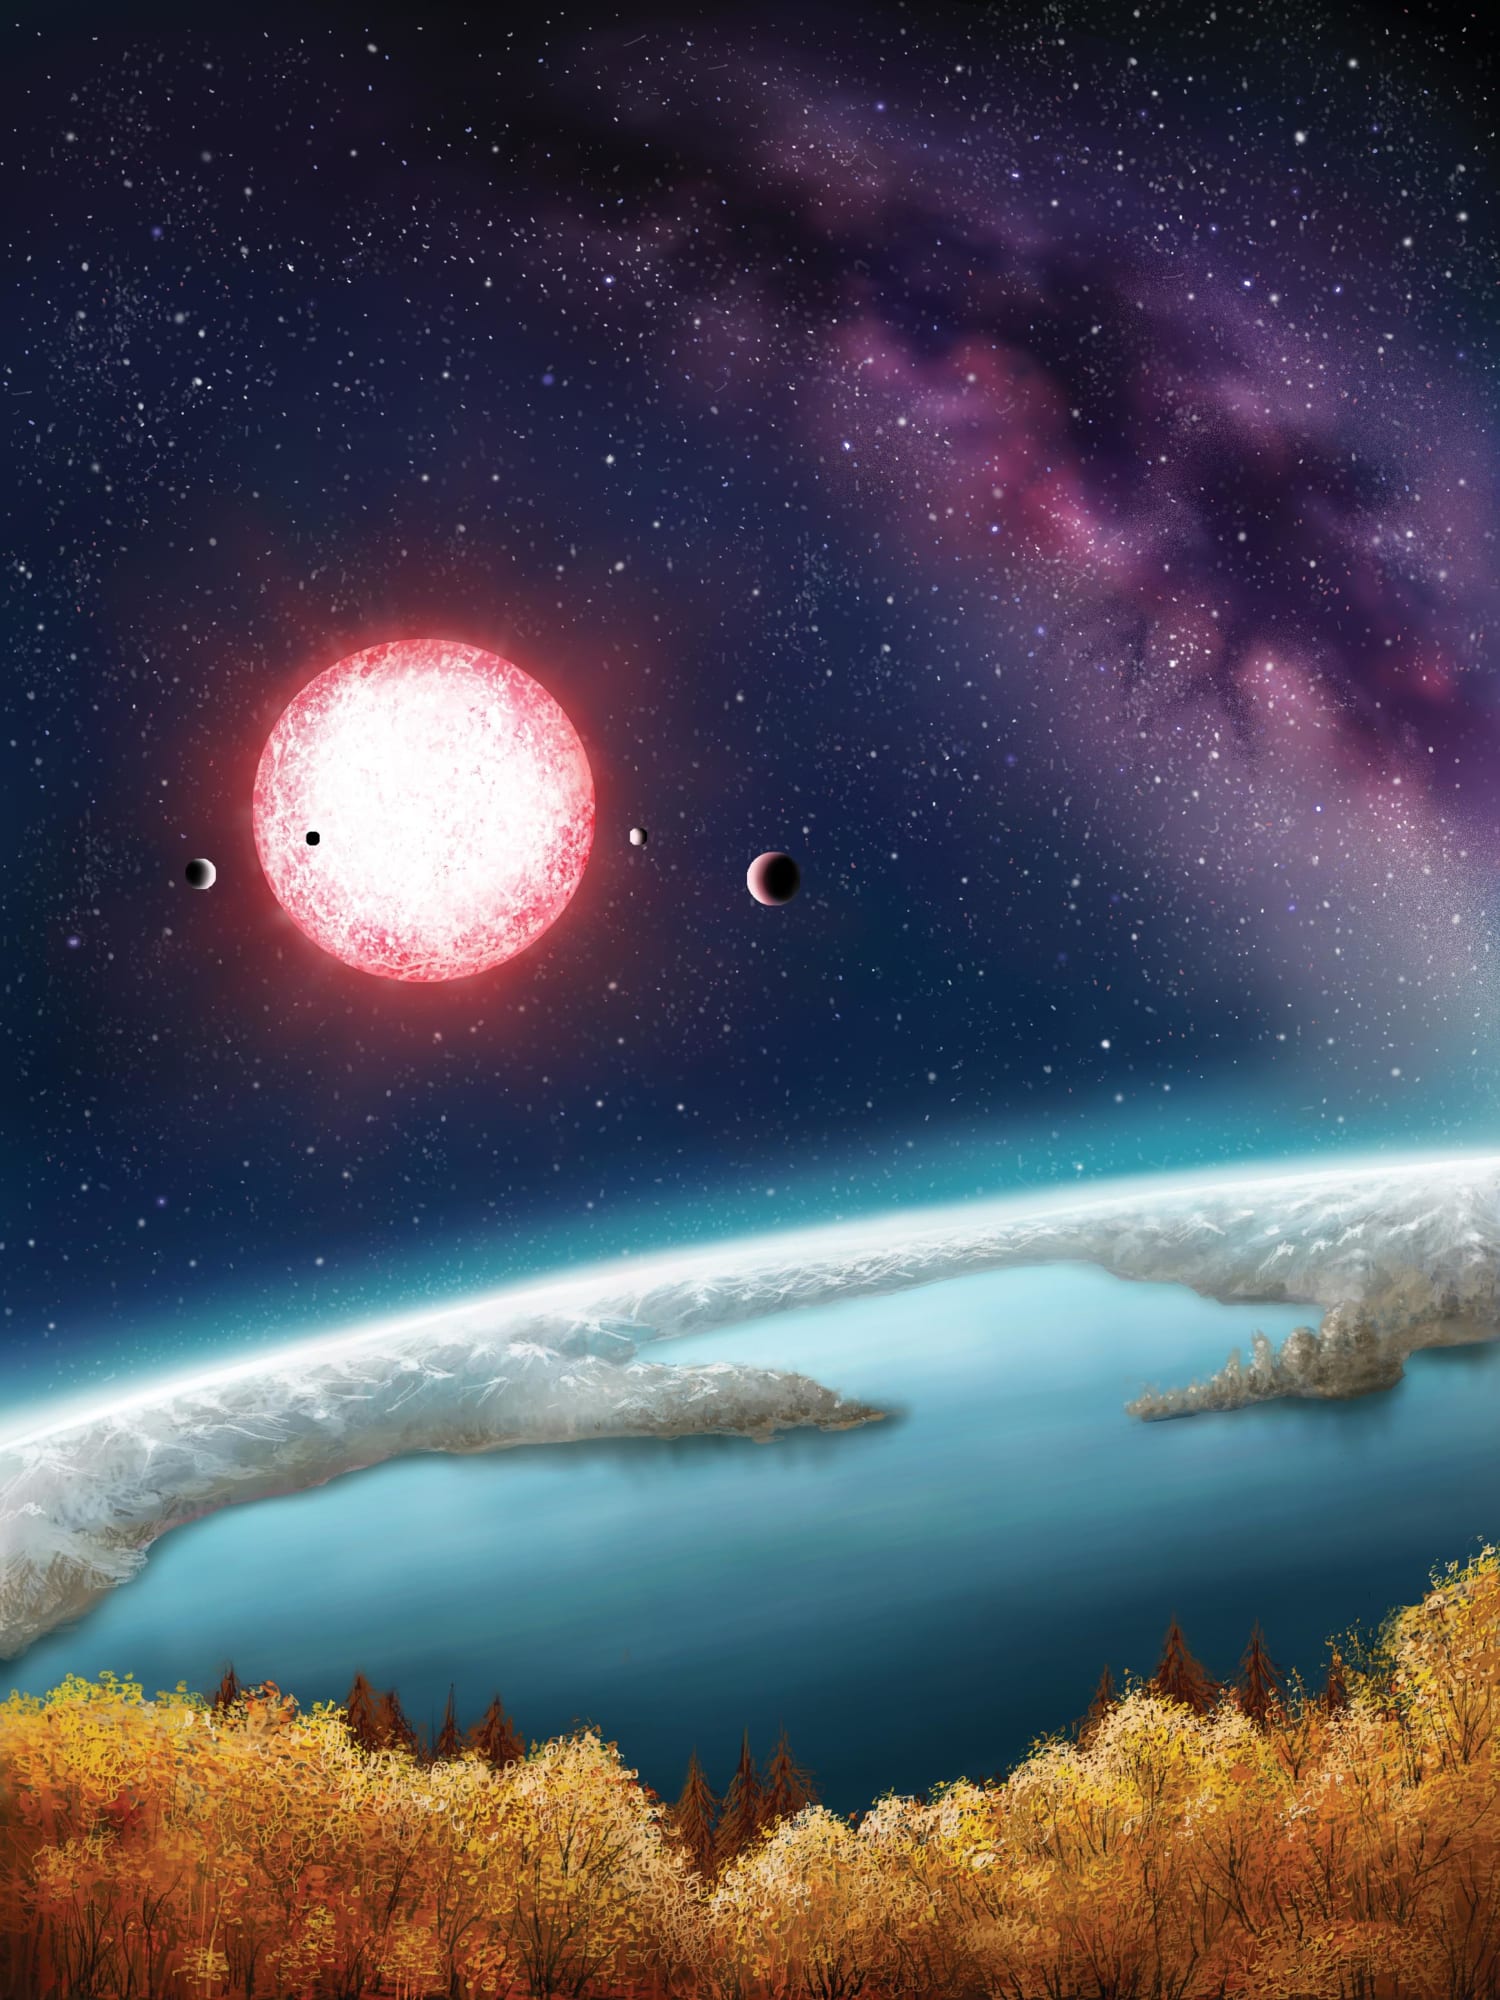 This artwork provides a speculative view of a landscape on Kepler-186f, an Earth-sized planet orbiting a faraway M-class dwarf star.